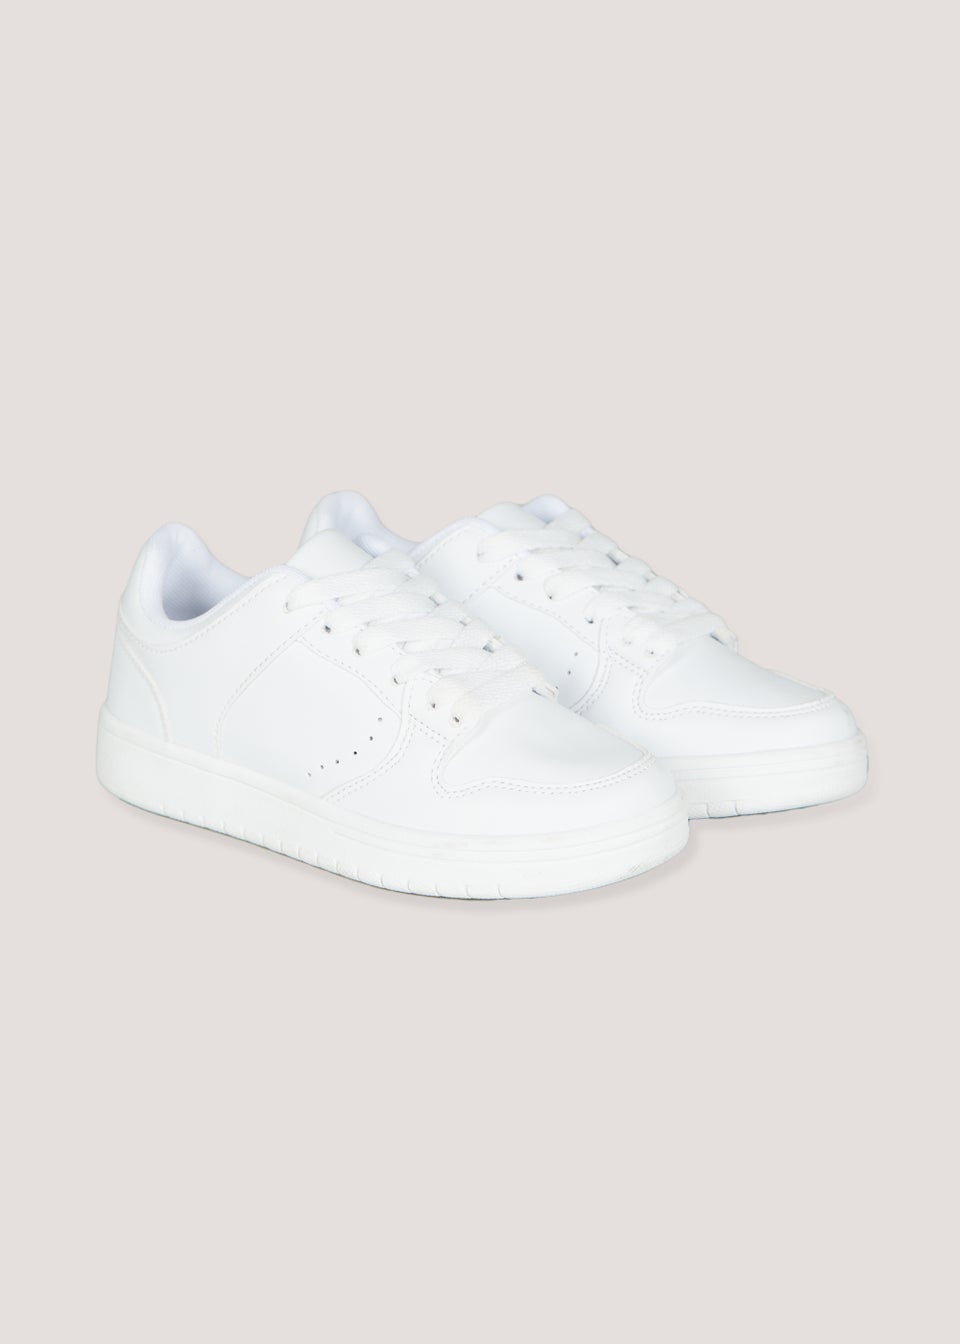 Boys White Trainers (Younger 10-Older 6)